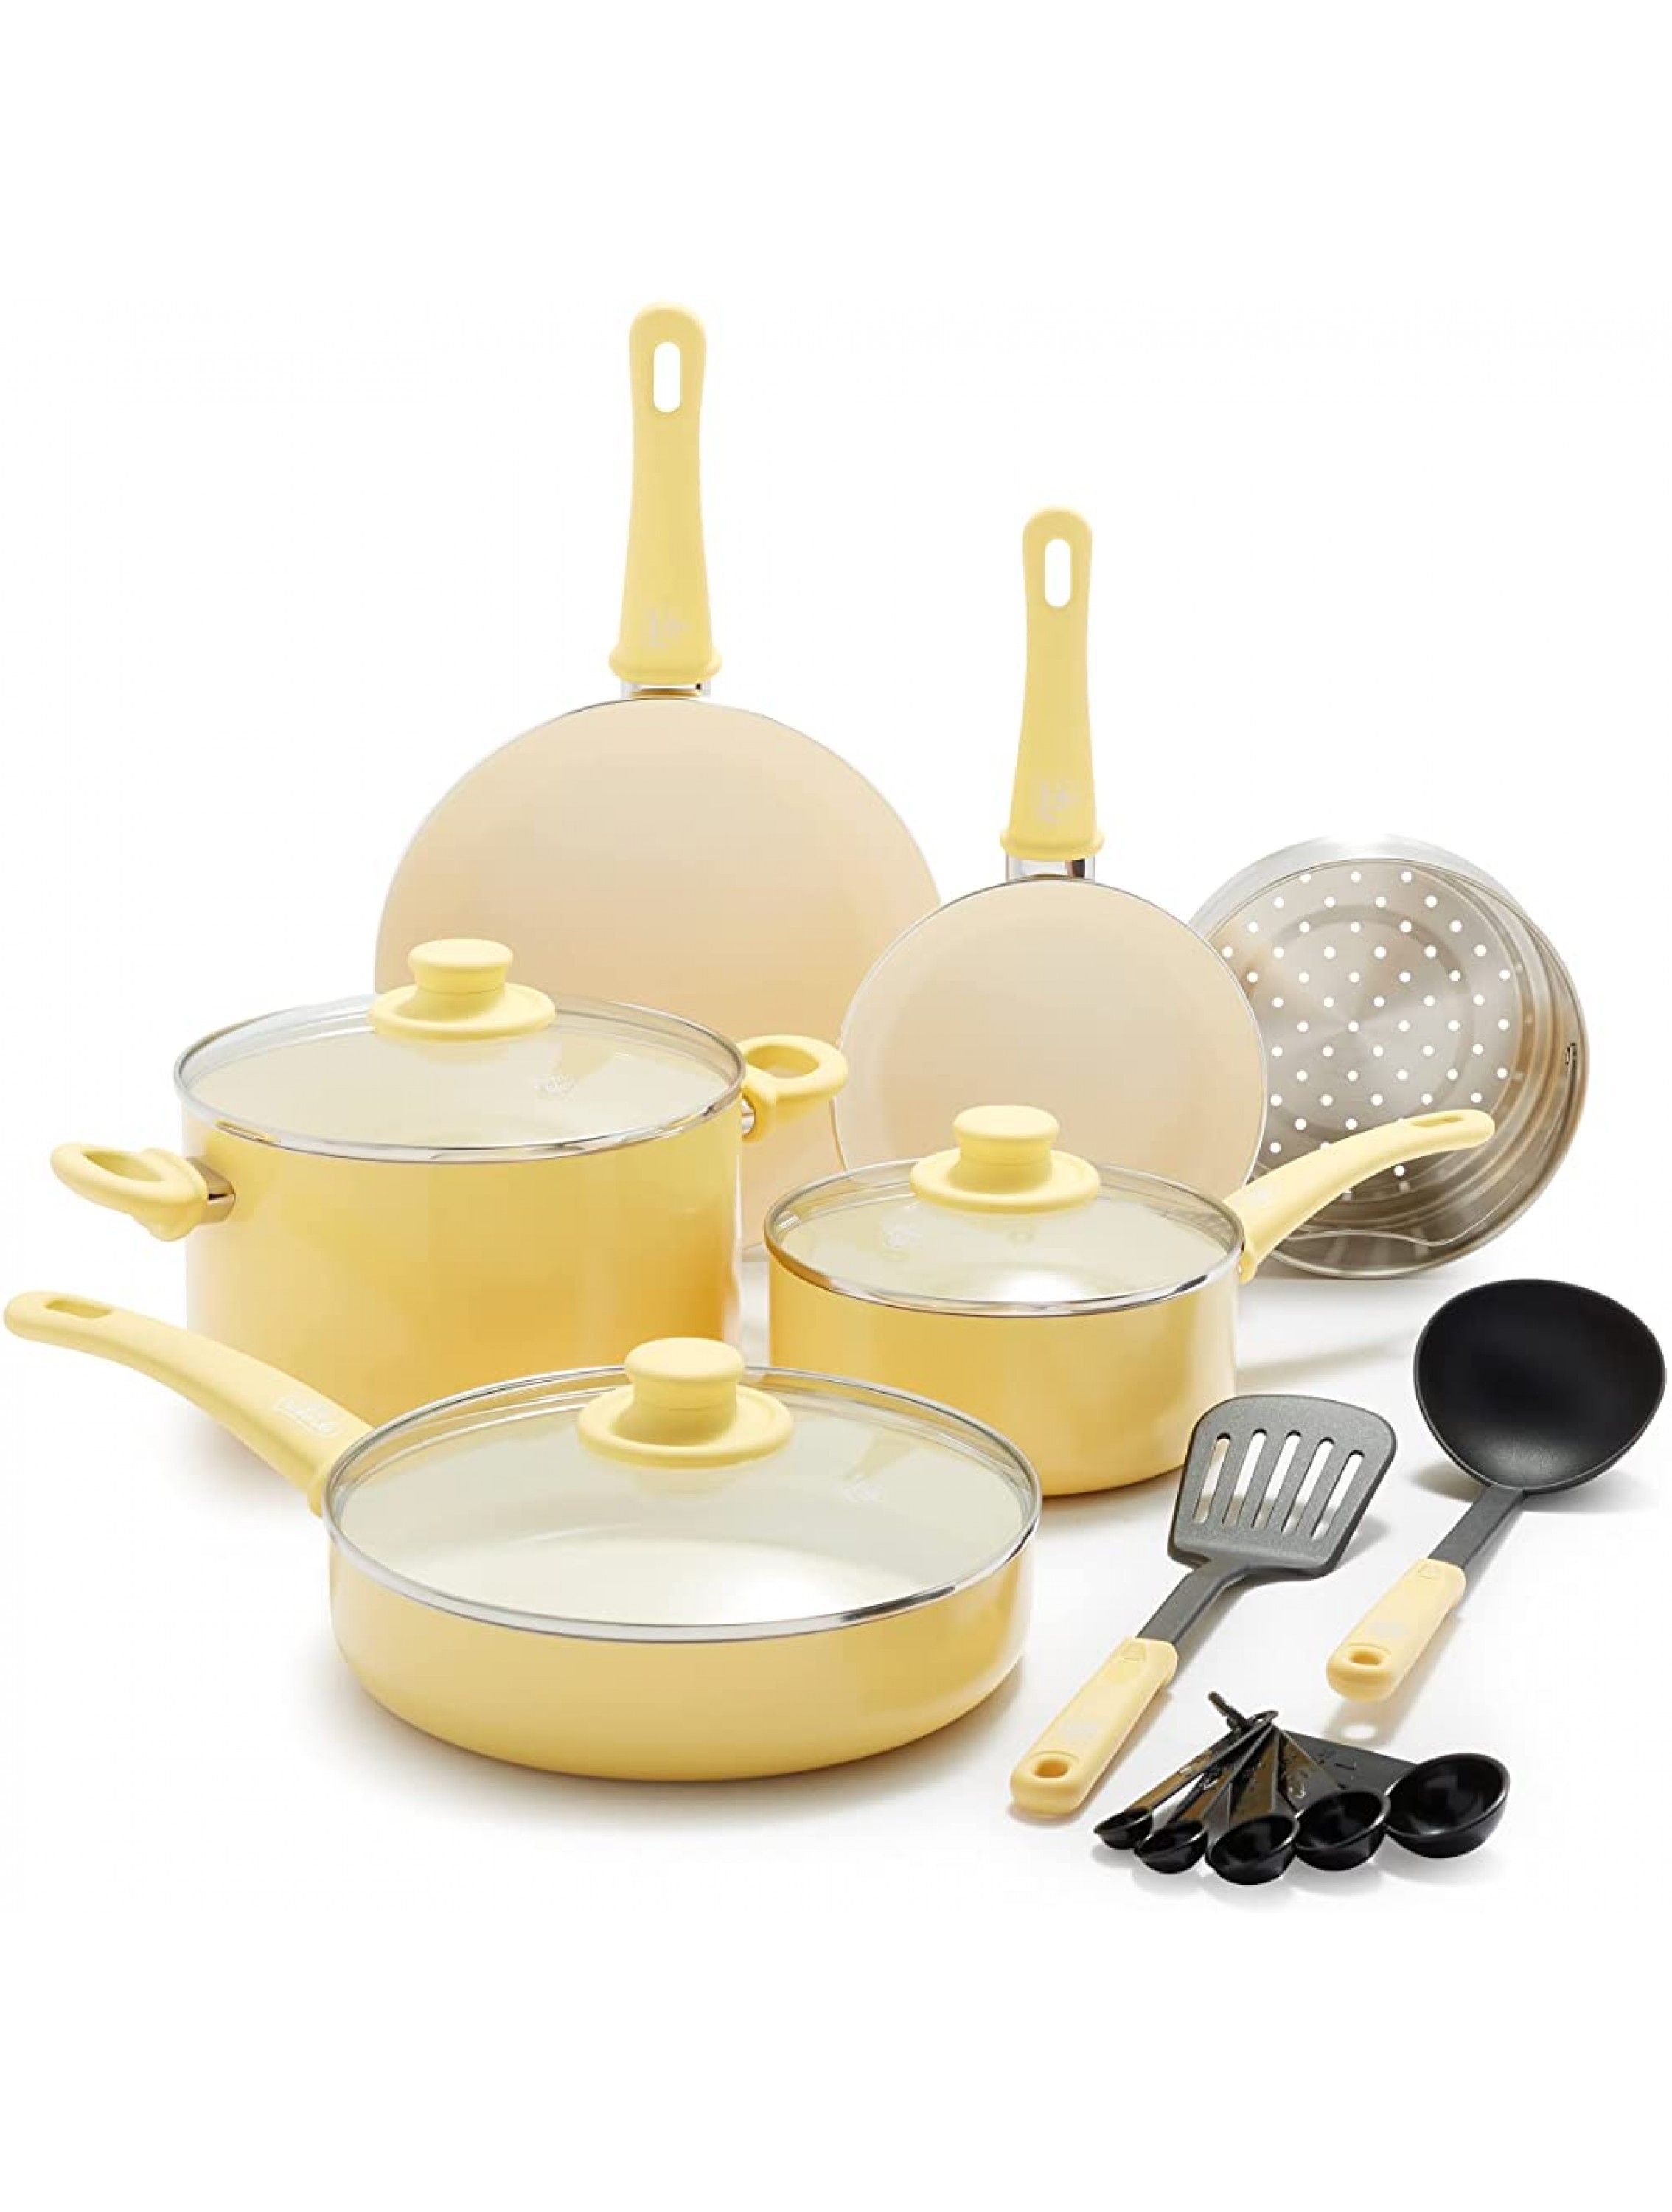 GreenLife Soft Grip Healthy Ceramic Nonstick 12 Piece Cookware Pots and Pans Set PFAS-Free Dishwasher Safe Yellow - BE1T4CLSB